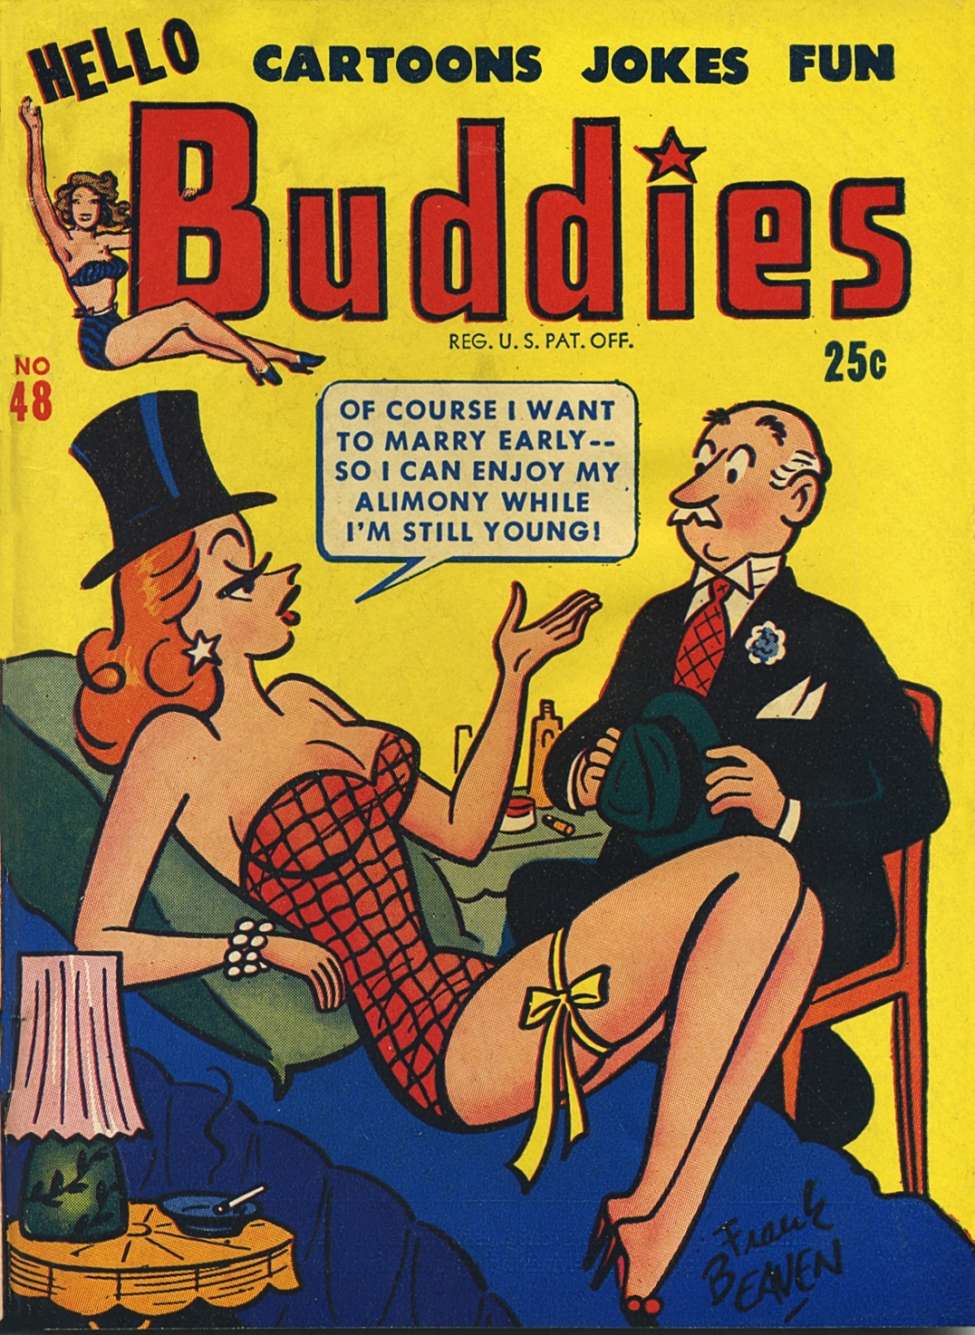 Comic Book Cover For Hello Buddies 48